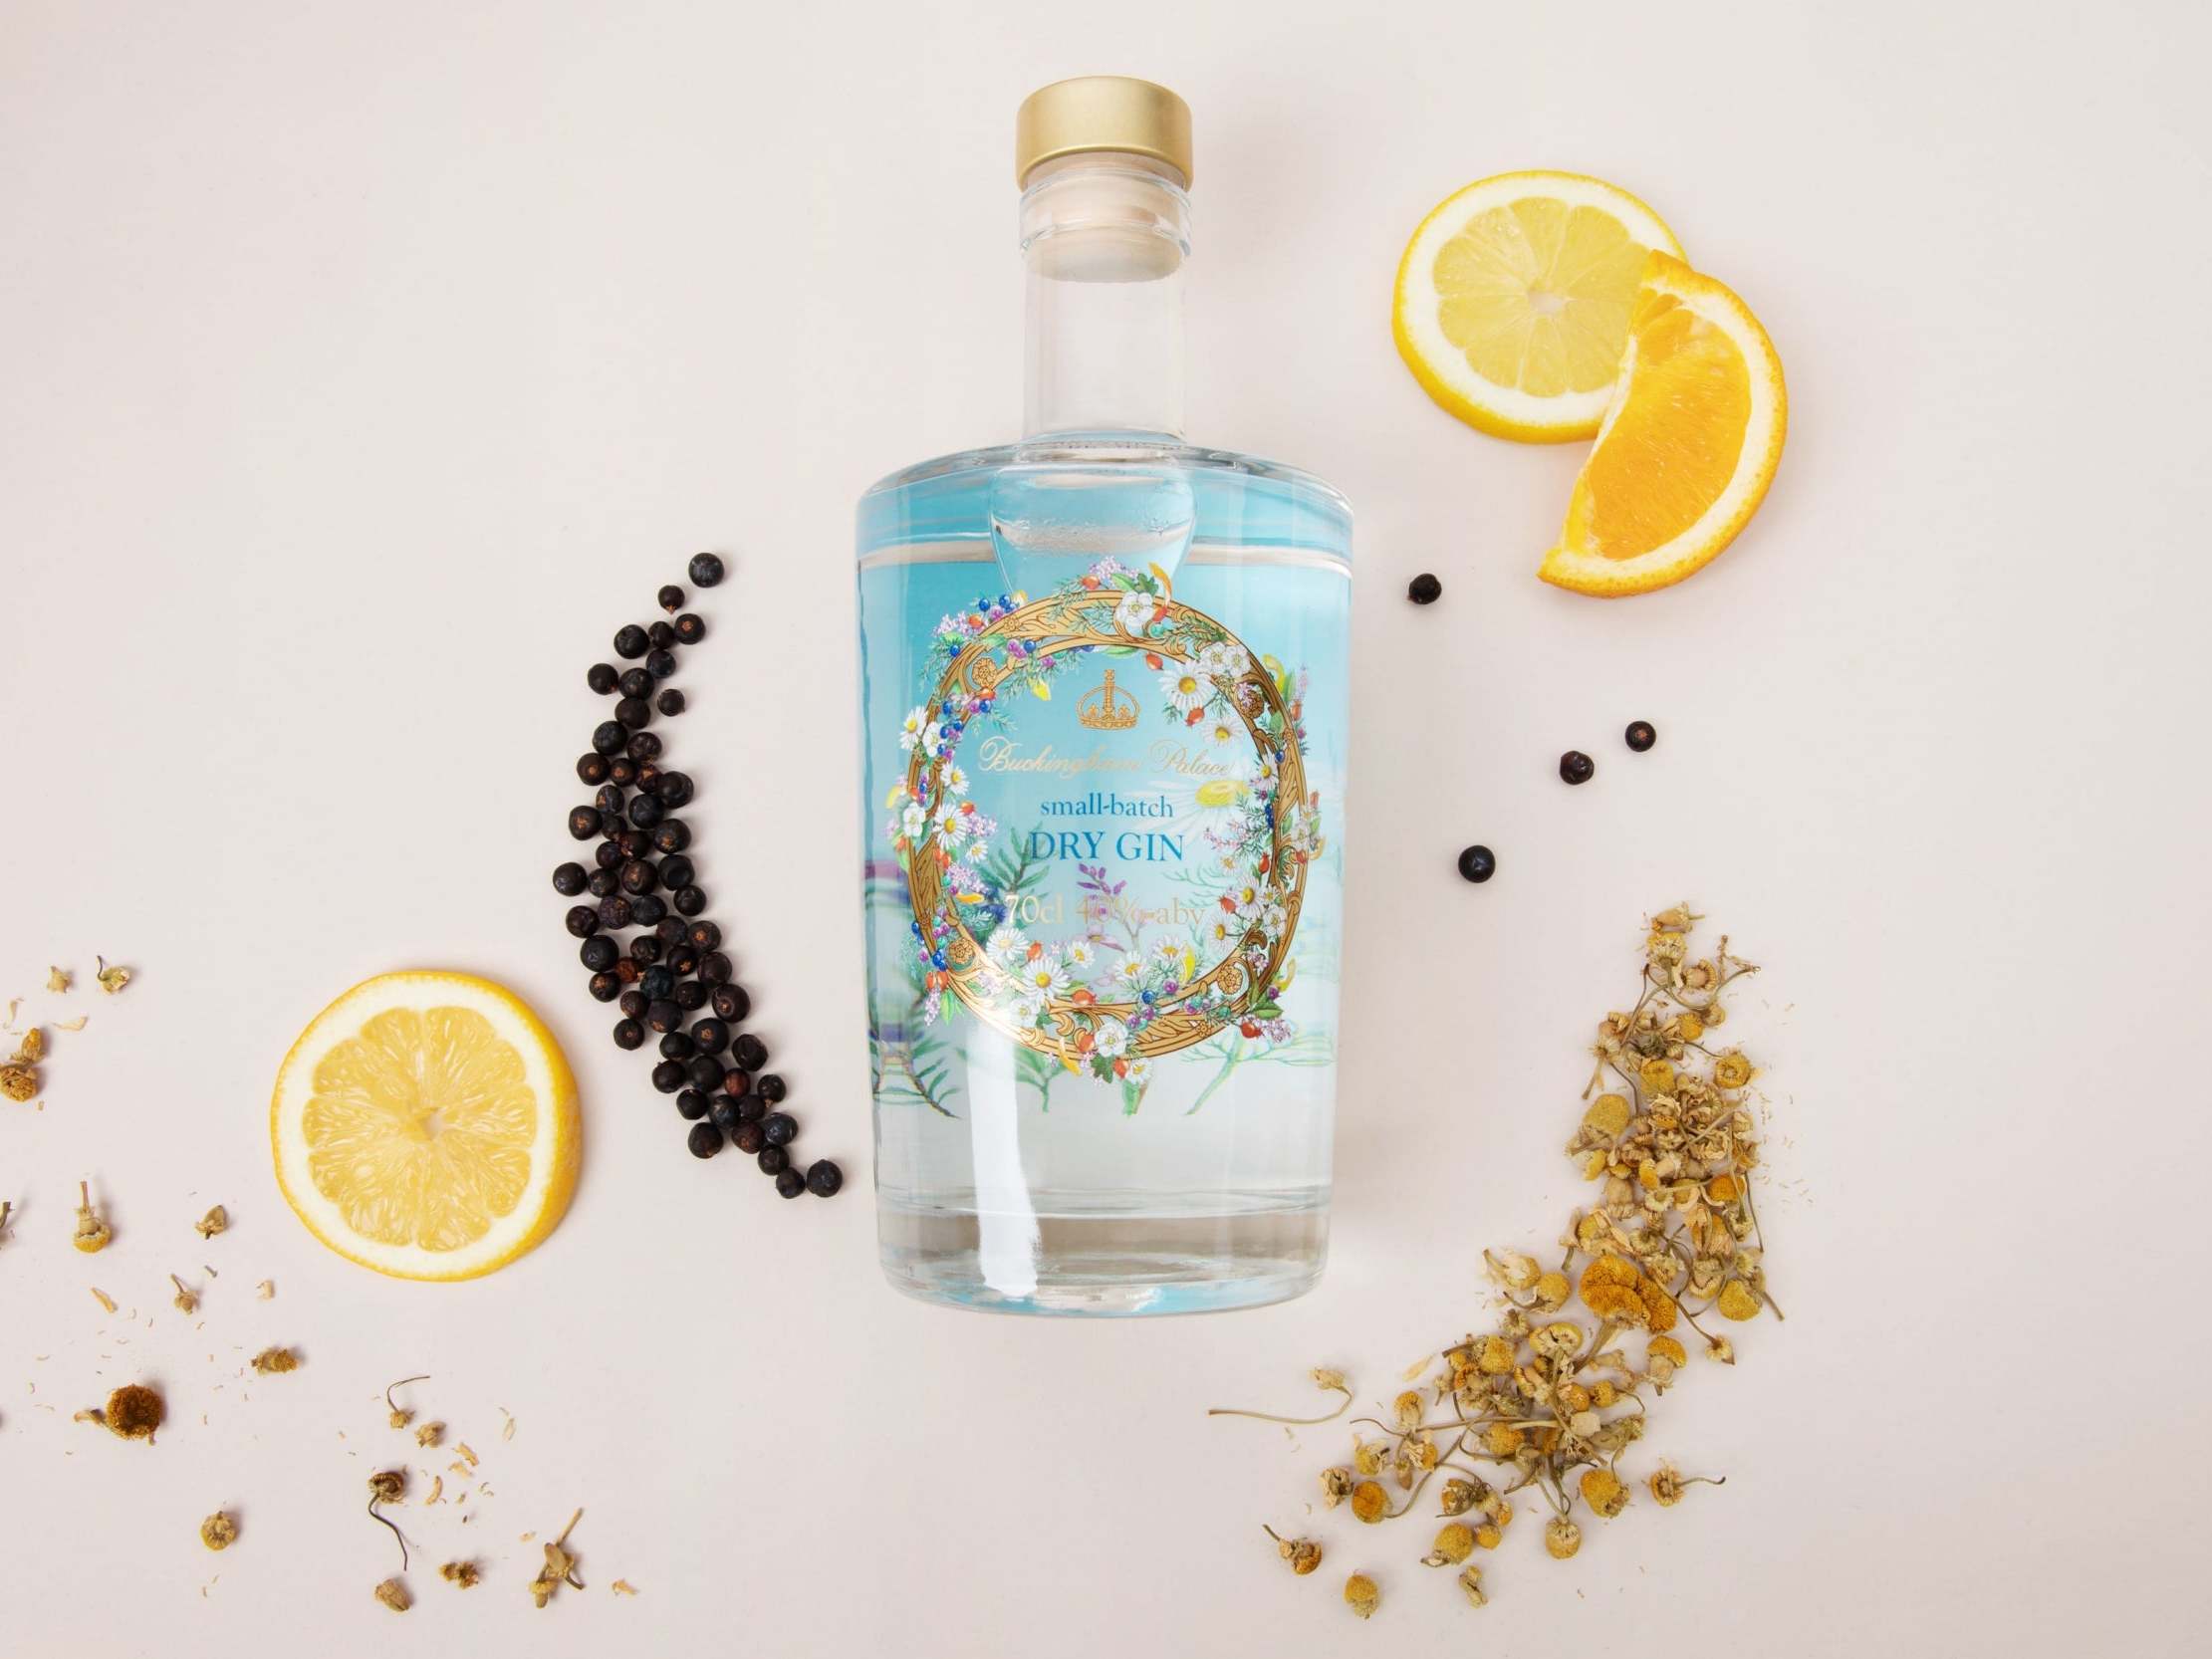 While the Queen's gin is now available to pre-order, if you simply can't wait for your next drink, try these other citrus flavours now